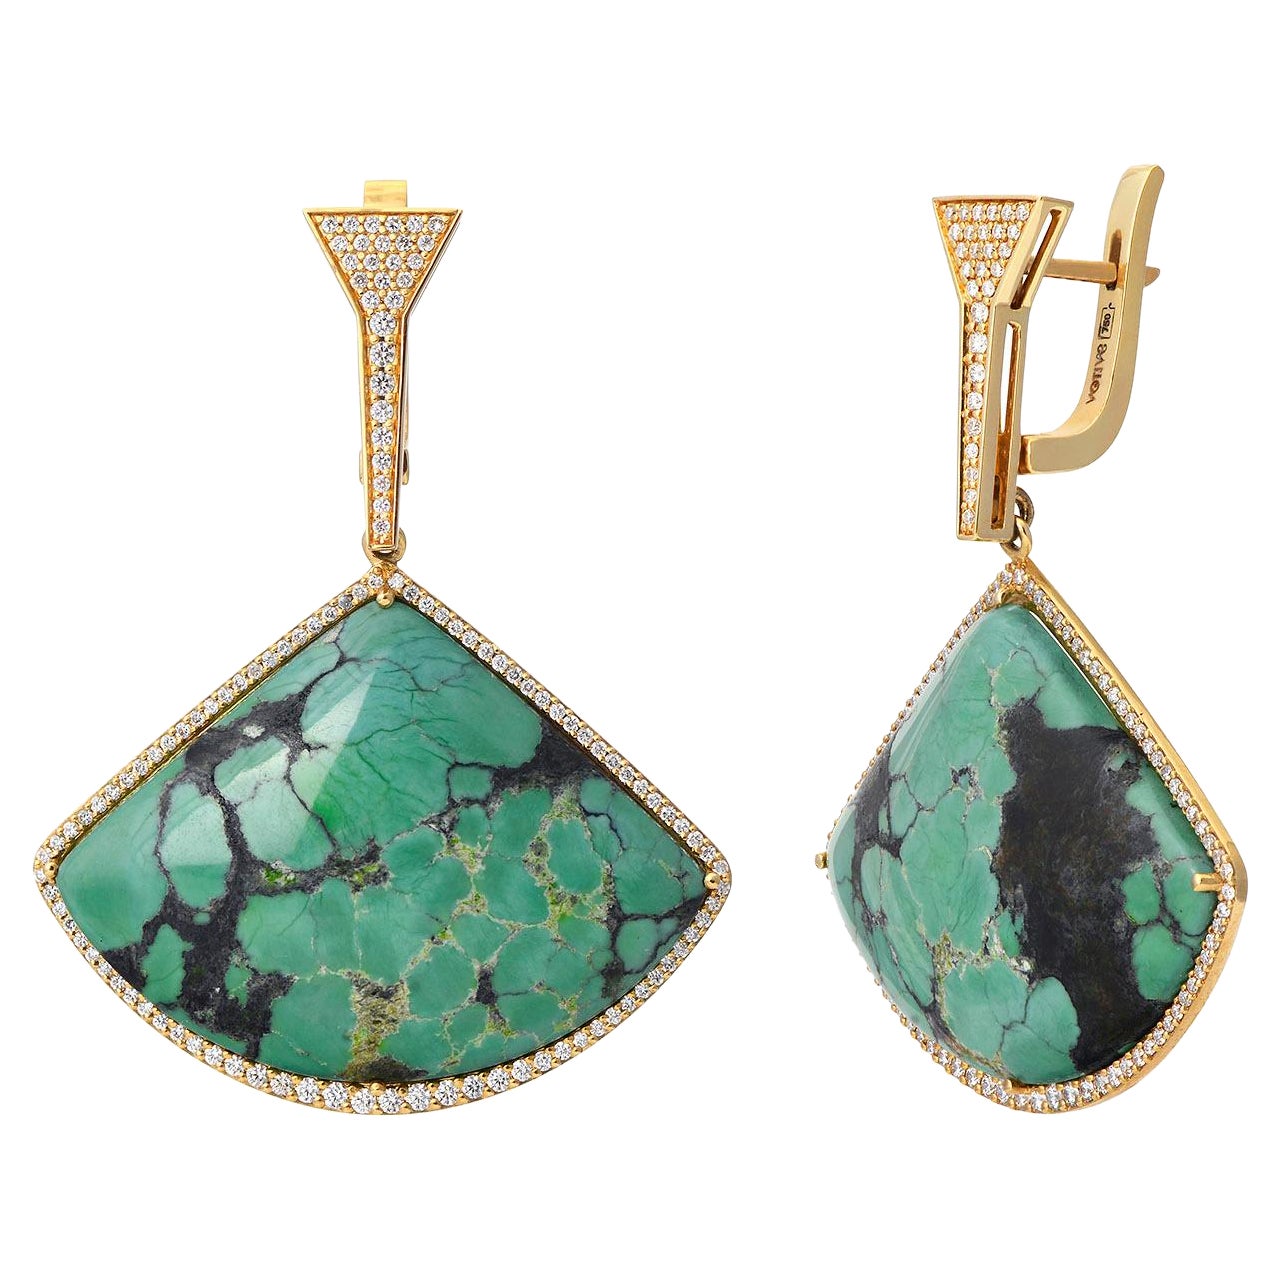 18K Gold Earrings with Green Turquoise and Diamonds